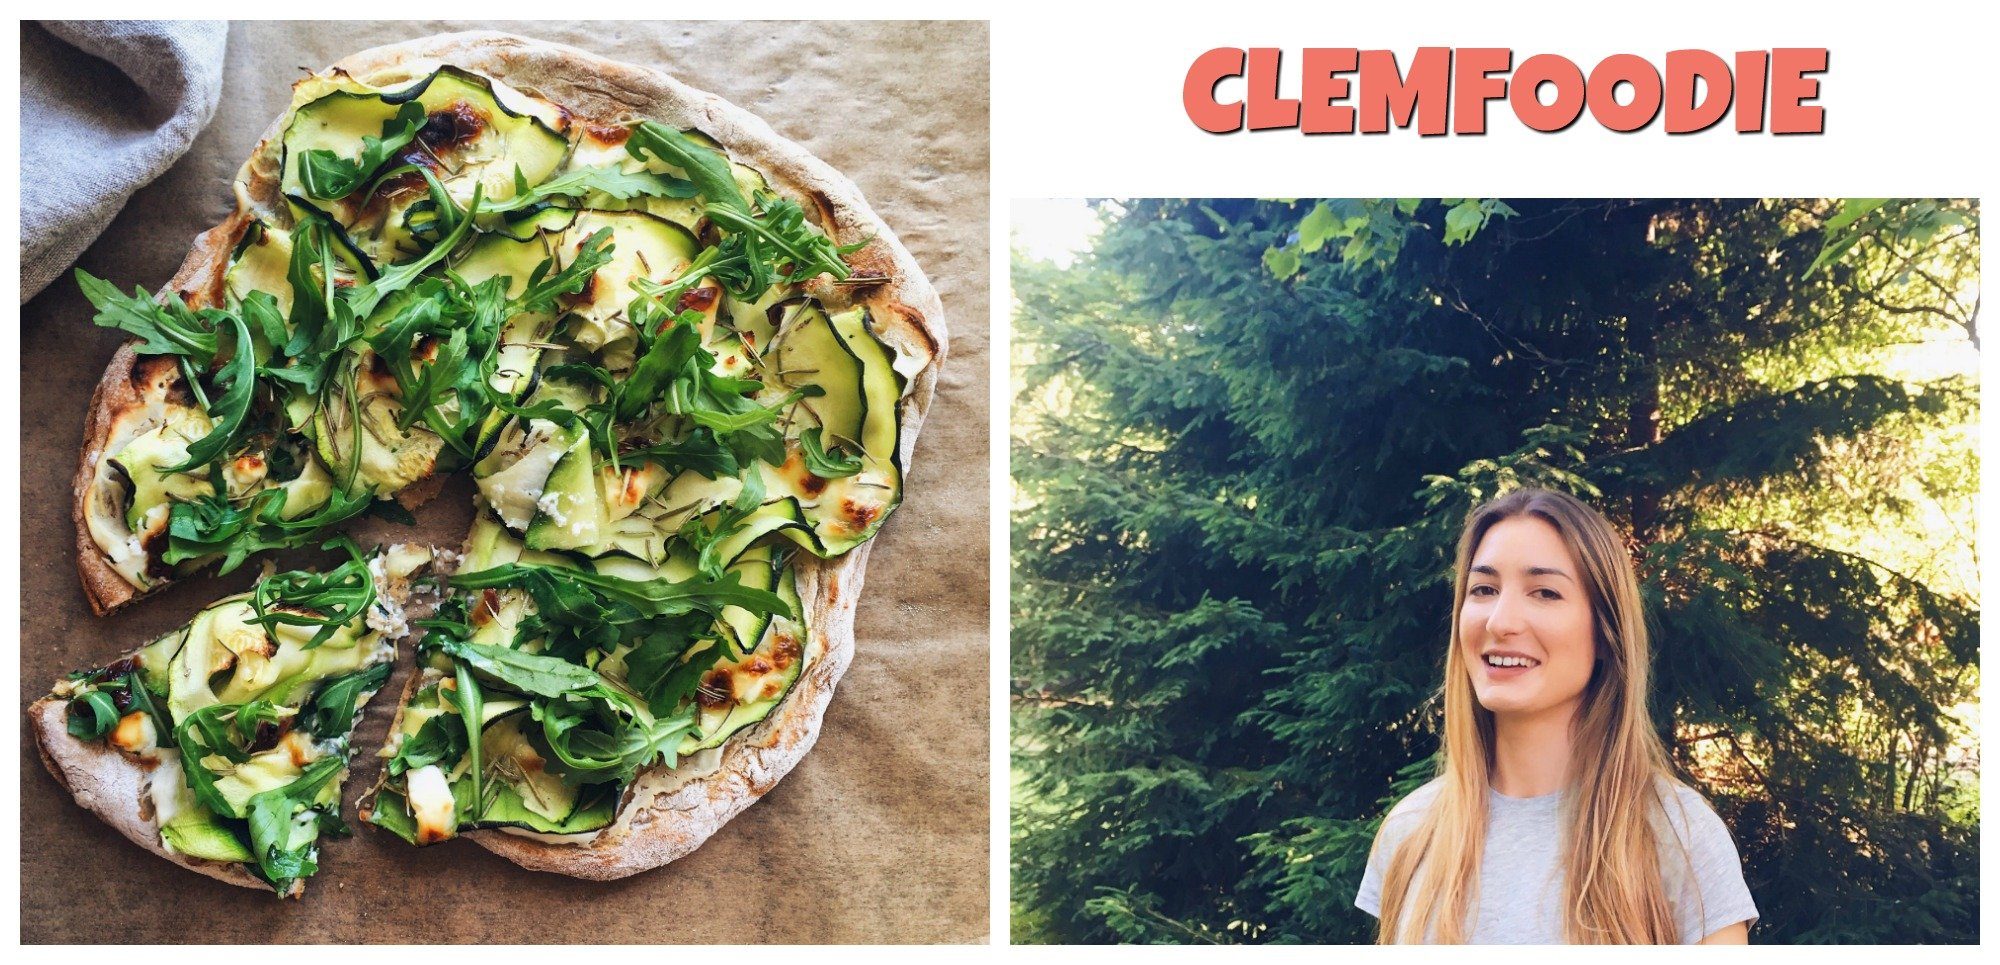 CLEMFOODIE BLOG CULINAIRE RECETTES HEALTHY